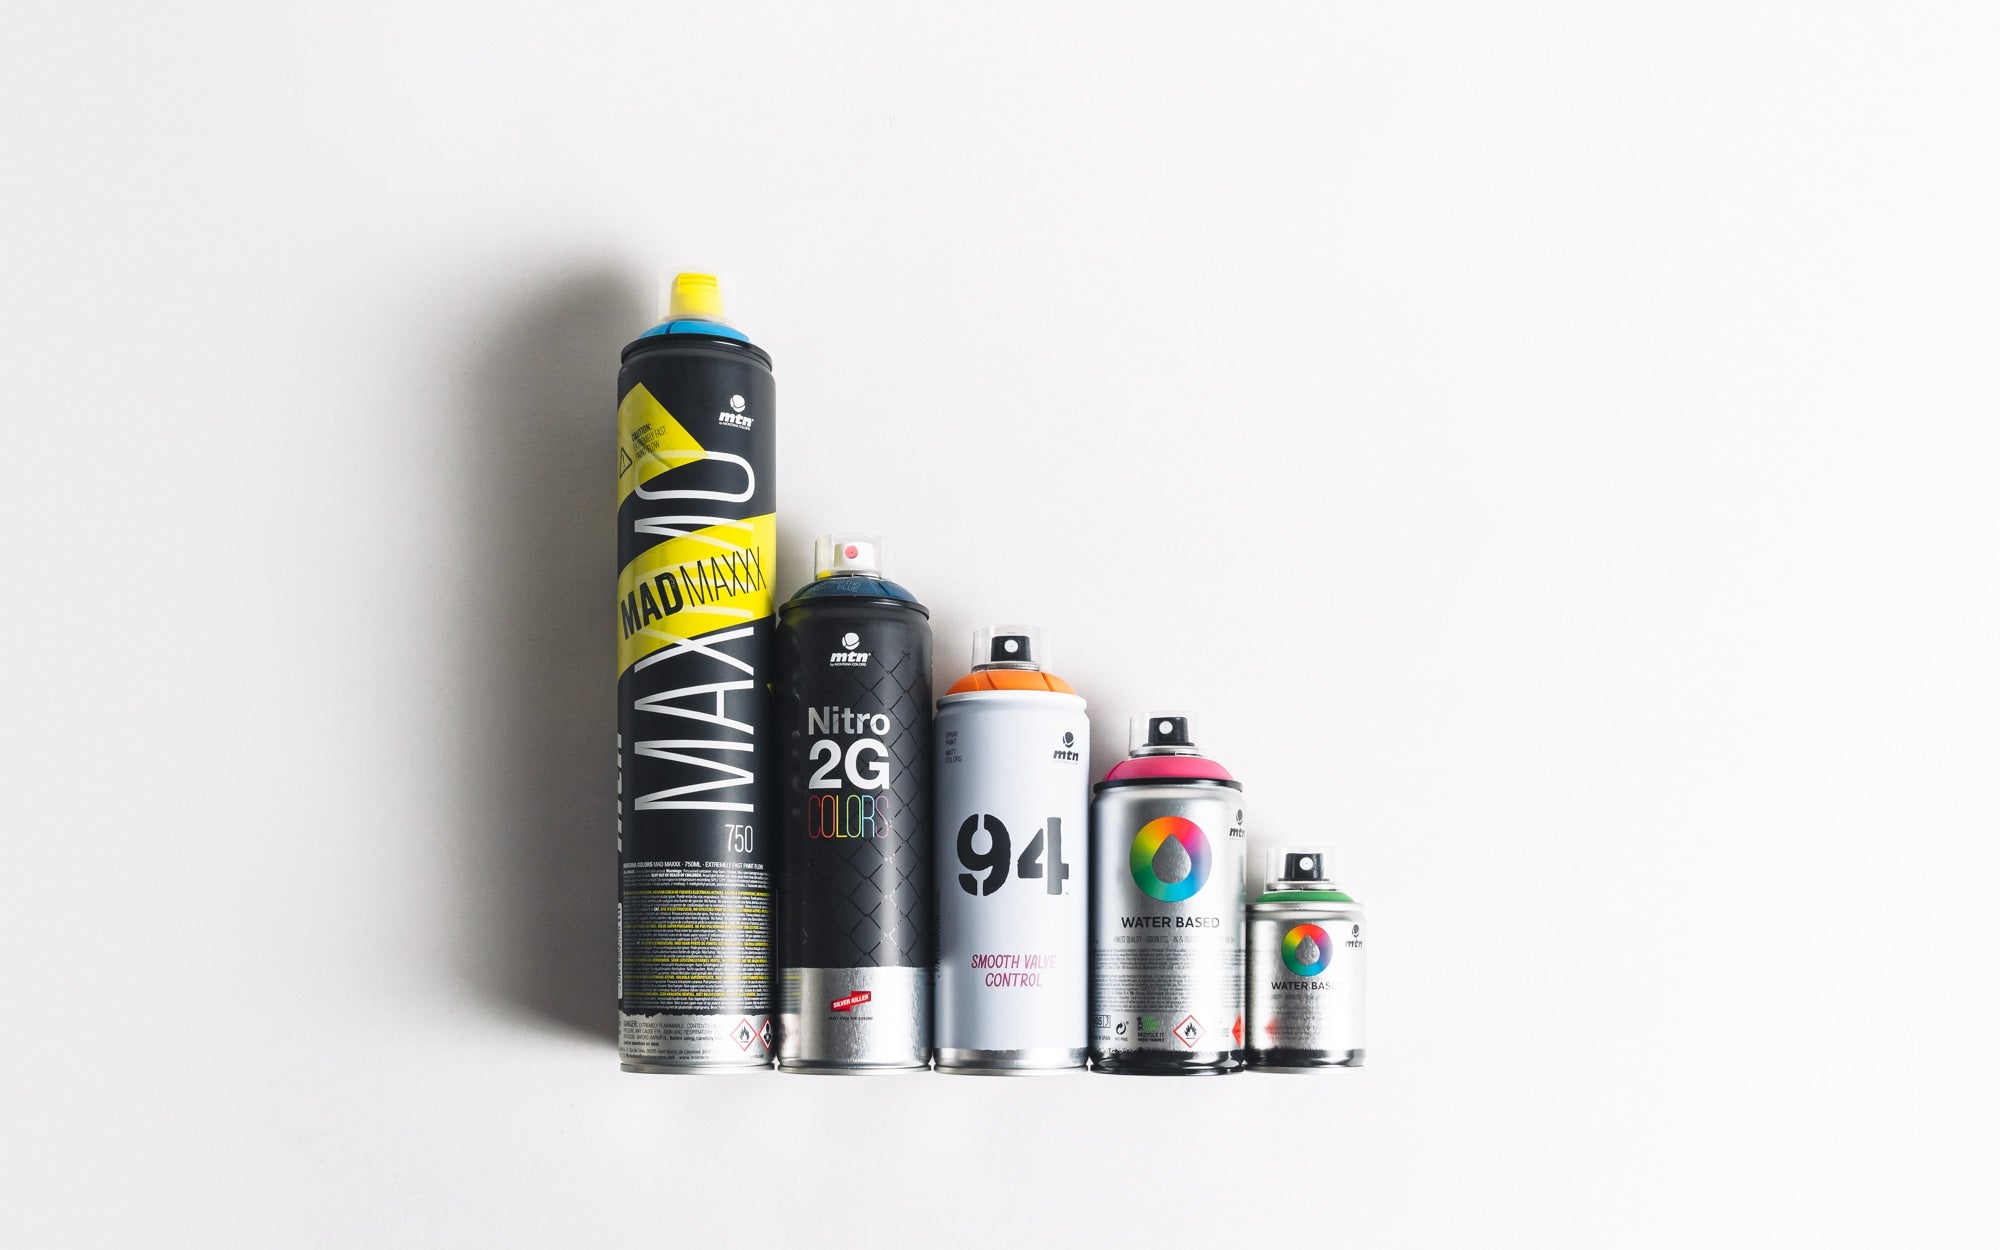 Various MTN spray cans in different colors and sizes.